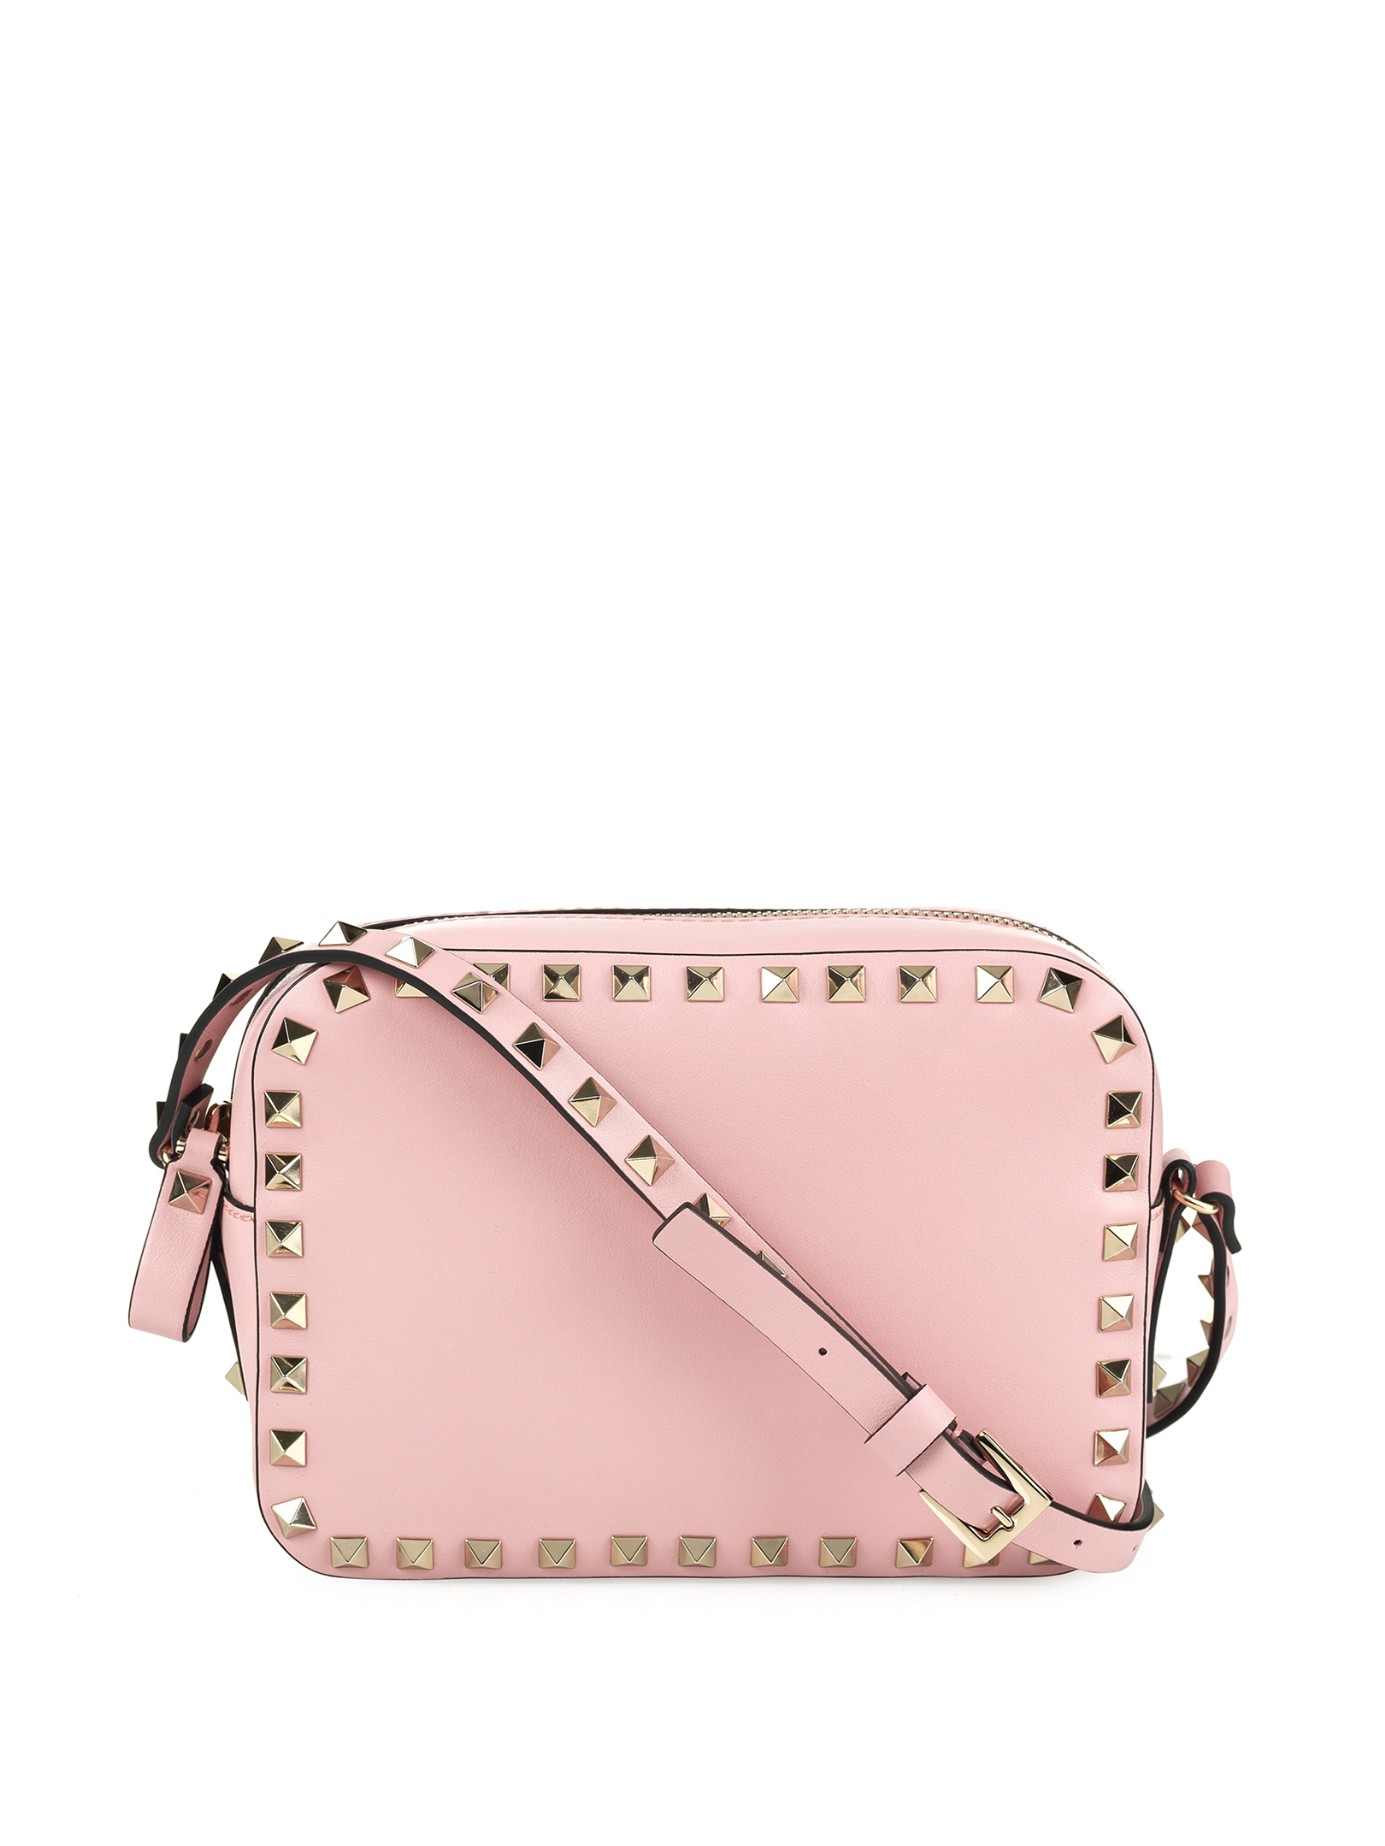 Lyst - Valentino Rockstud Leather Cross-Body Bag in Pink